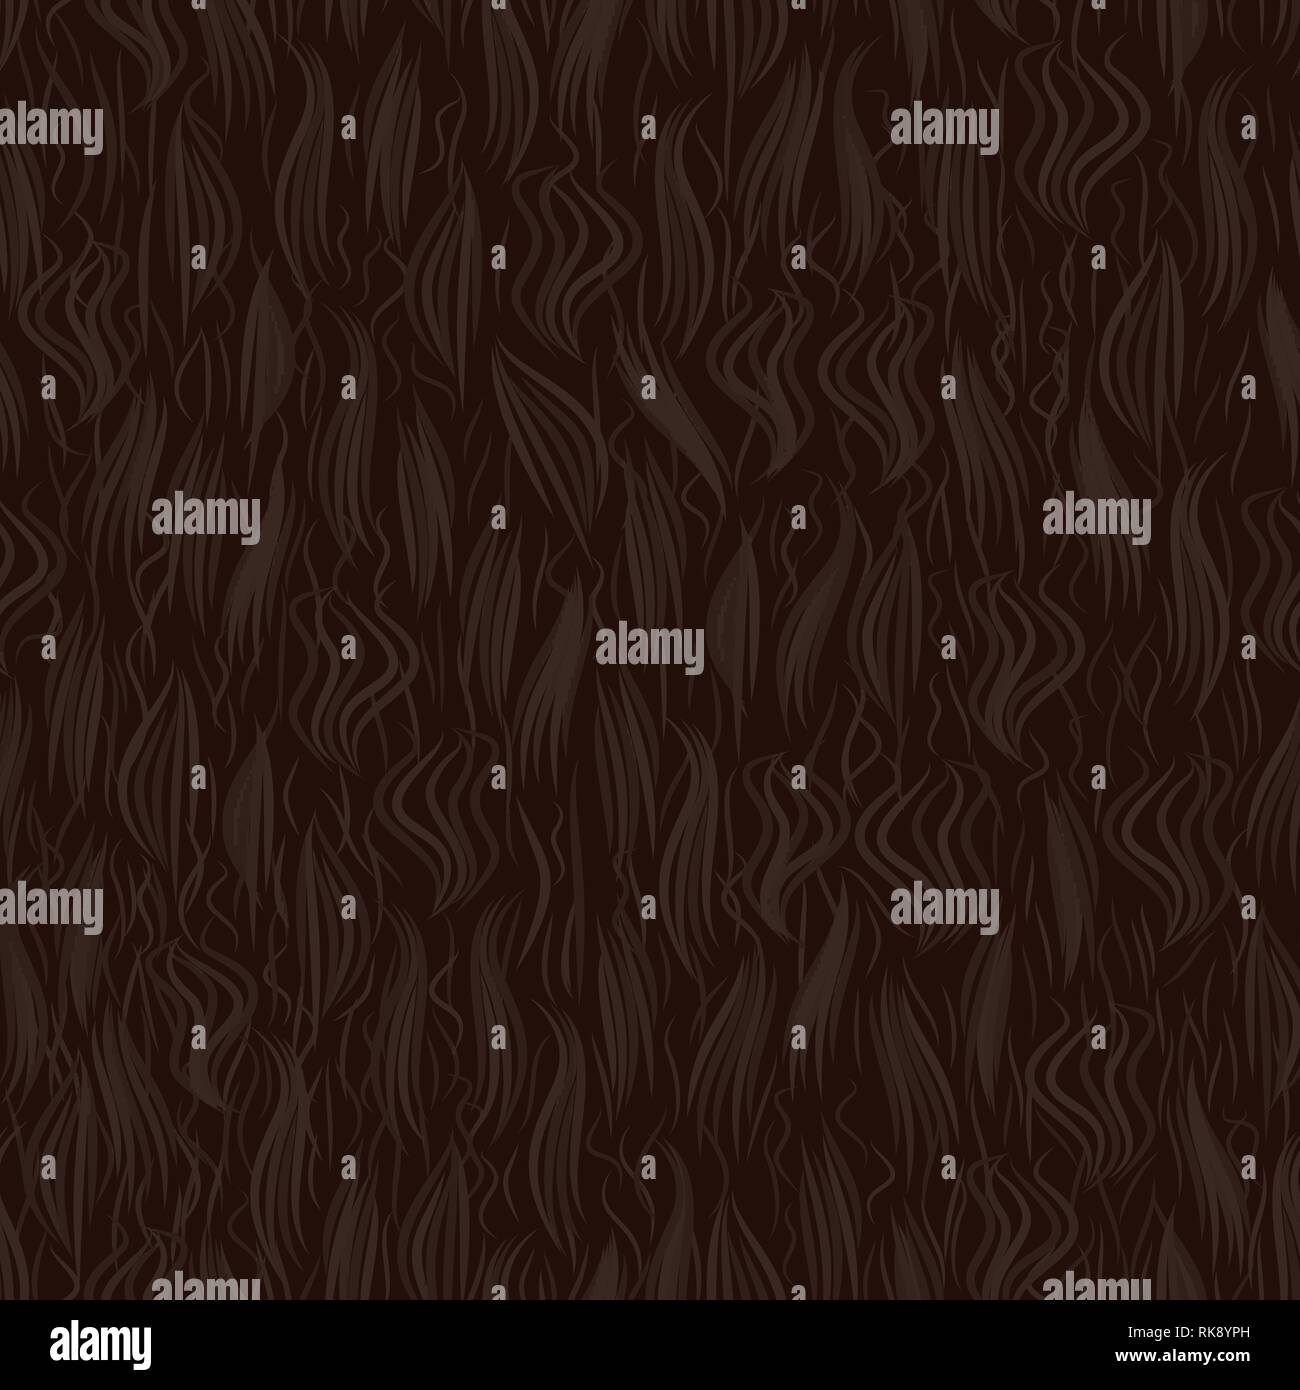 The texture of the brown fur. Seamless pattern background. Vector illustration. Stock Vector